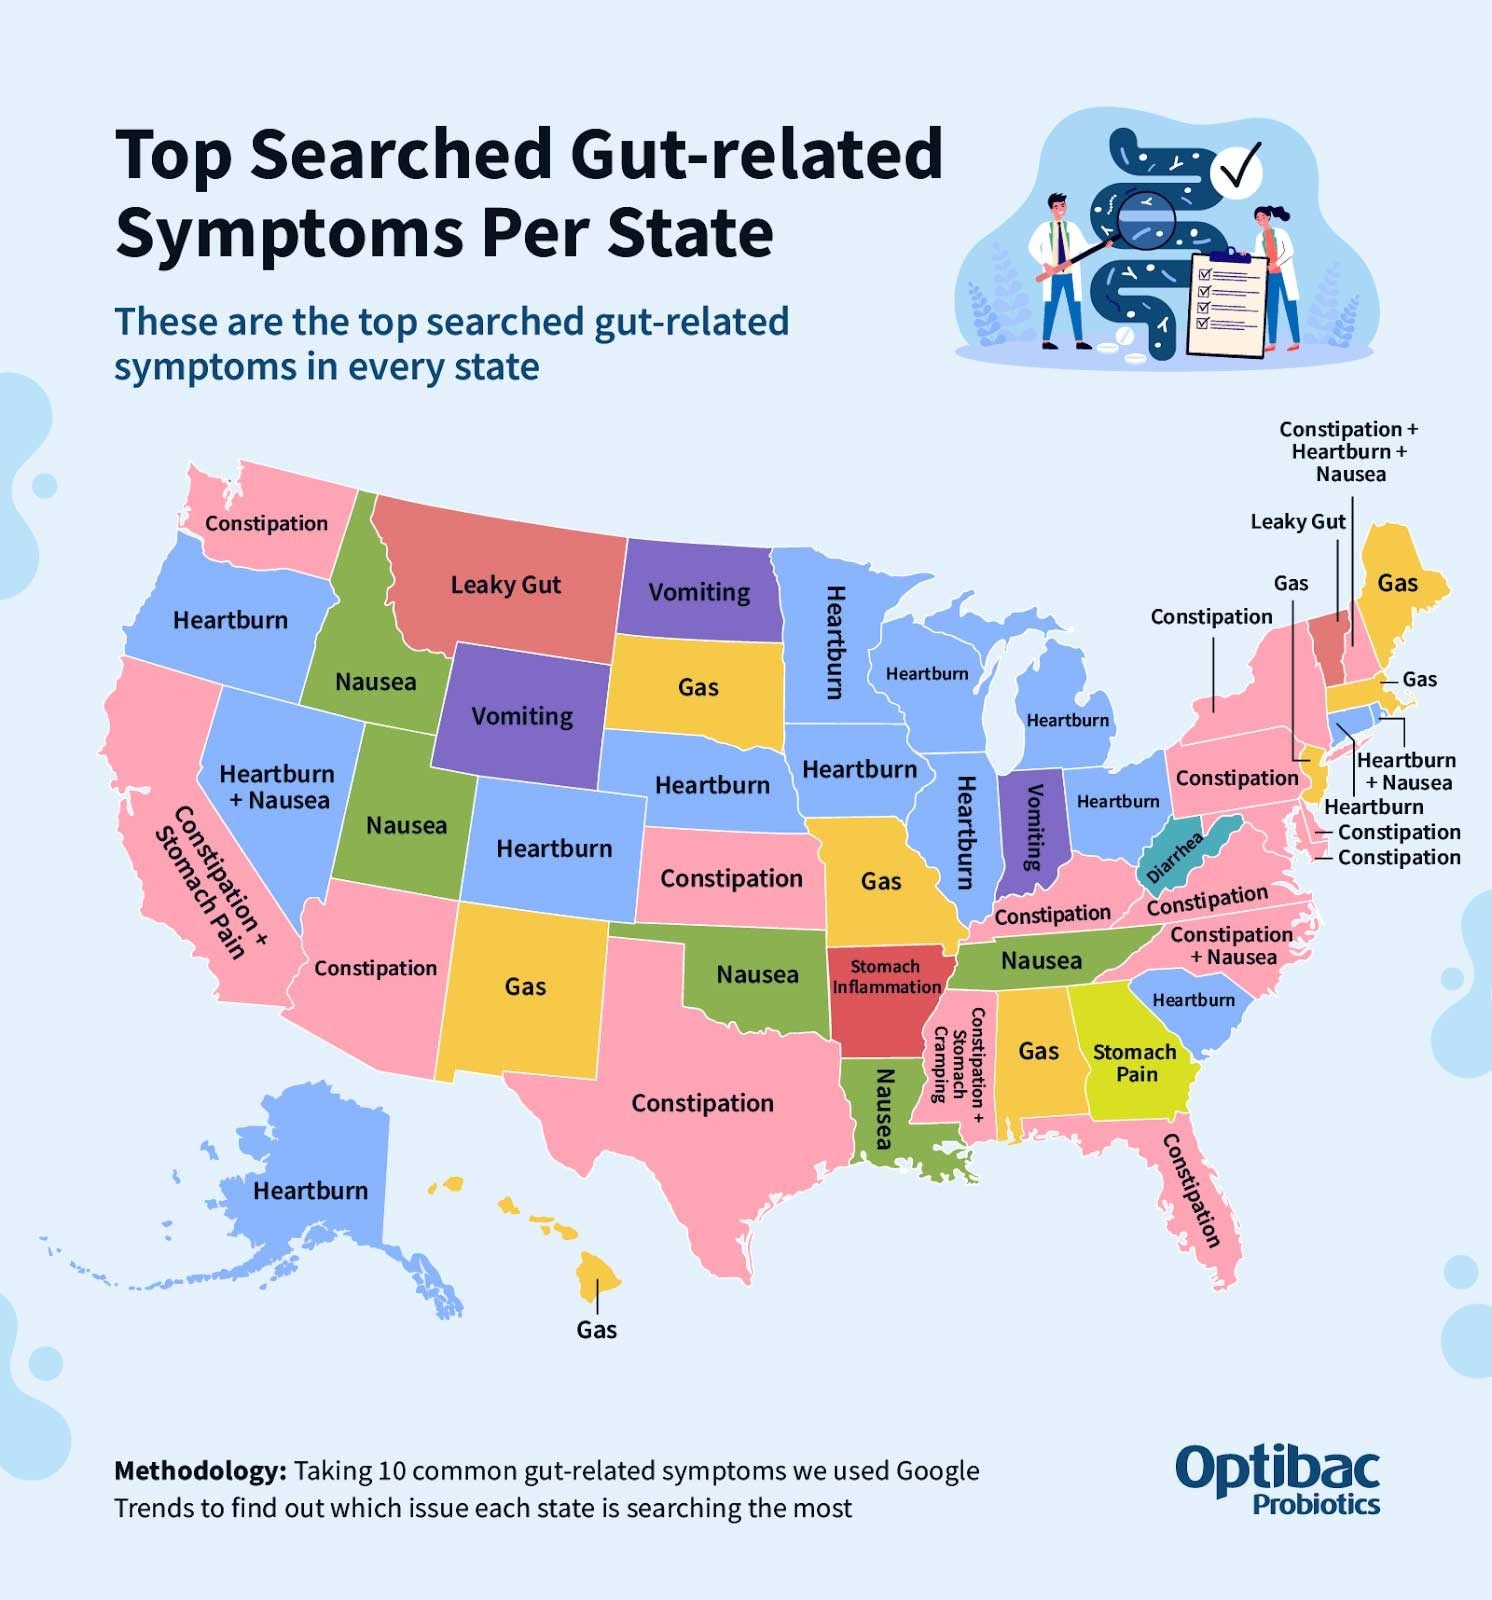 Gut issues per state #3